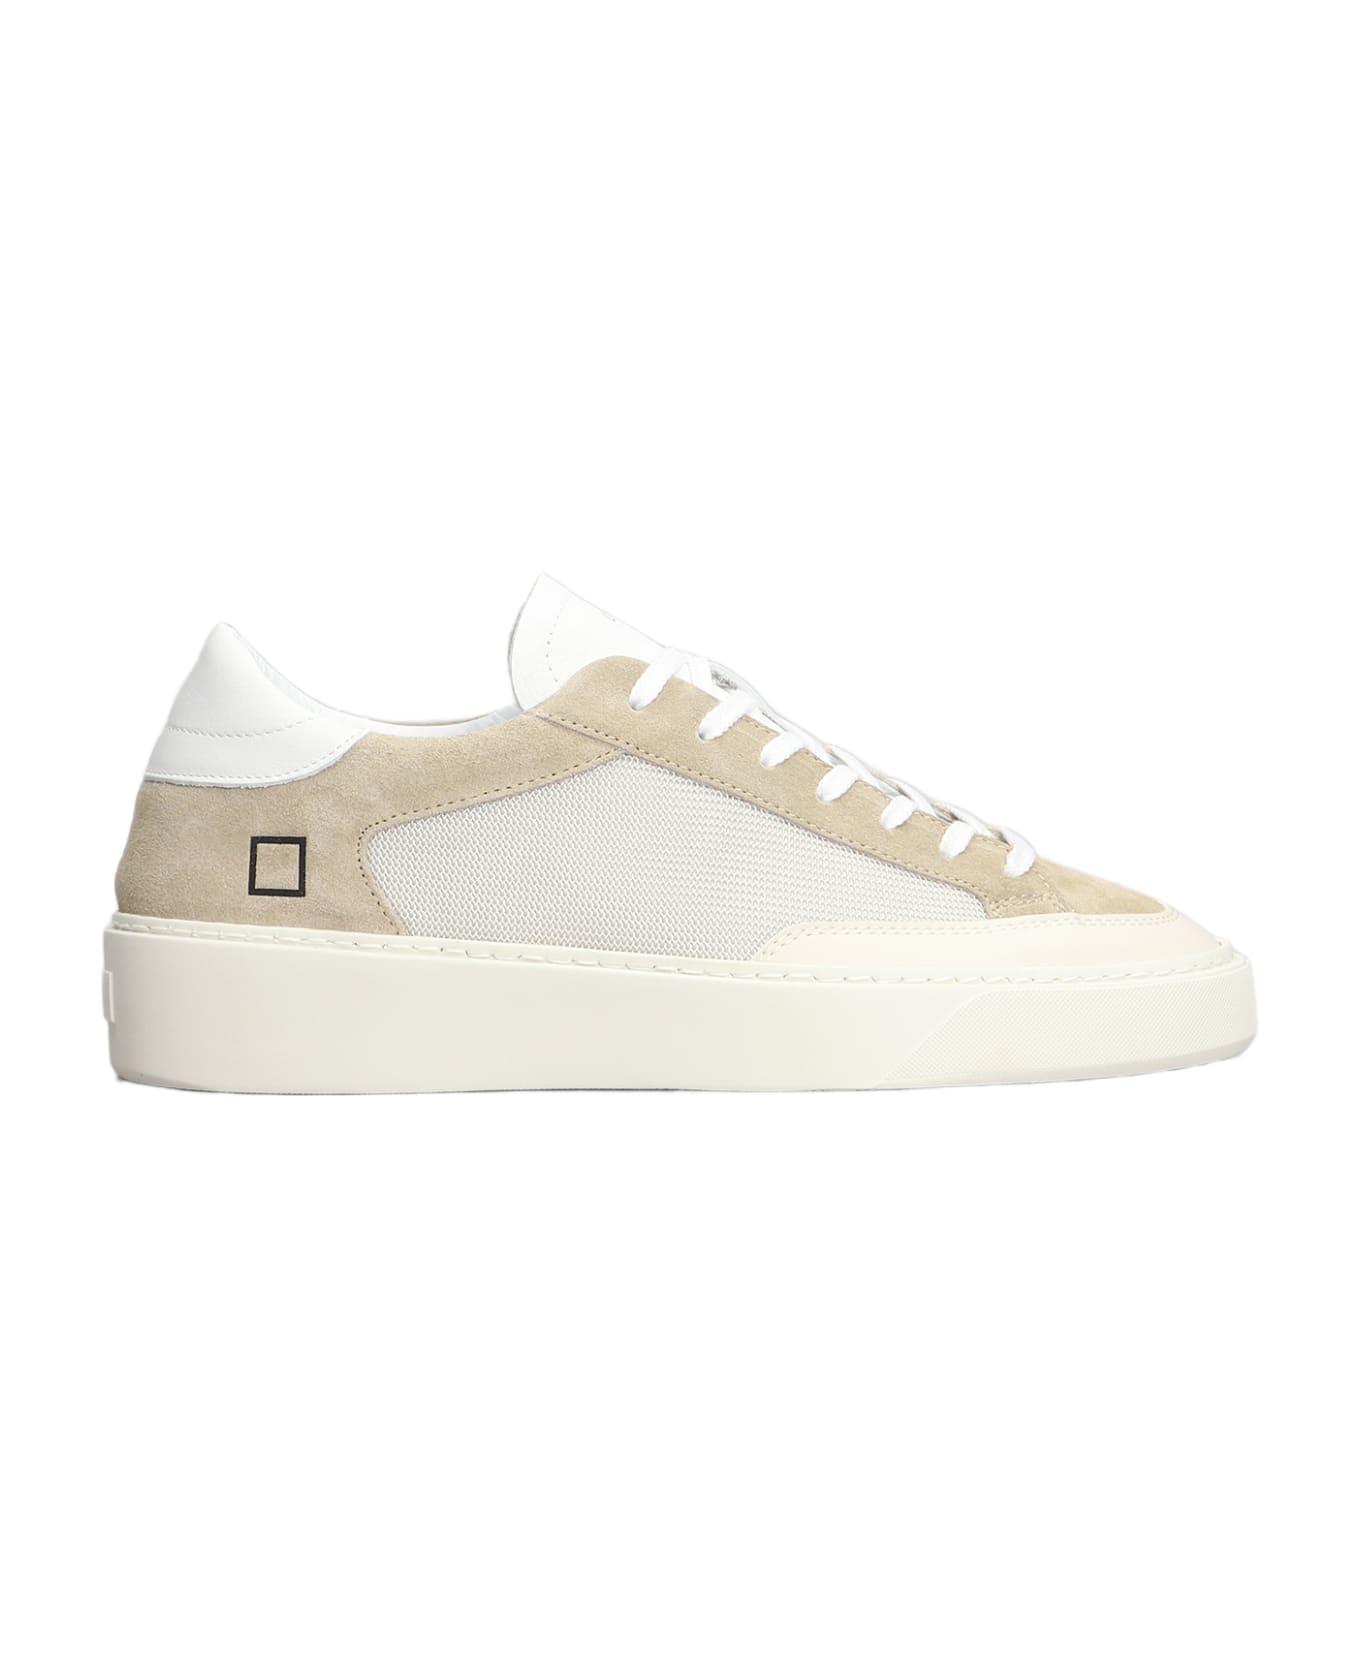 D.A.T.E. Levante Dragon Sneakers In Beige Suede And Fabric - beige